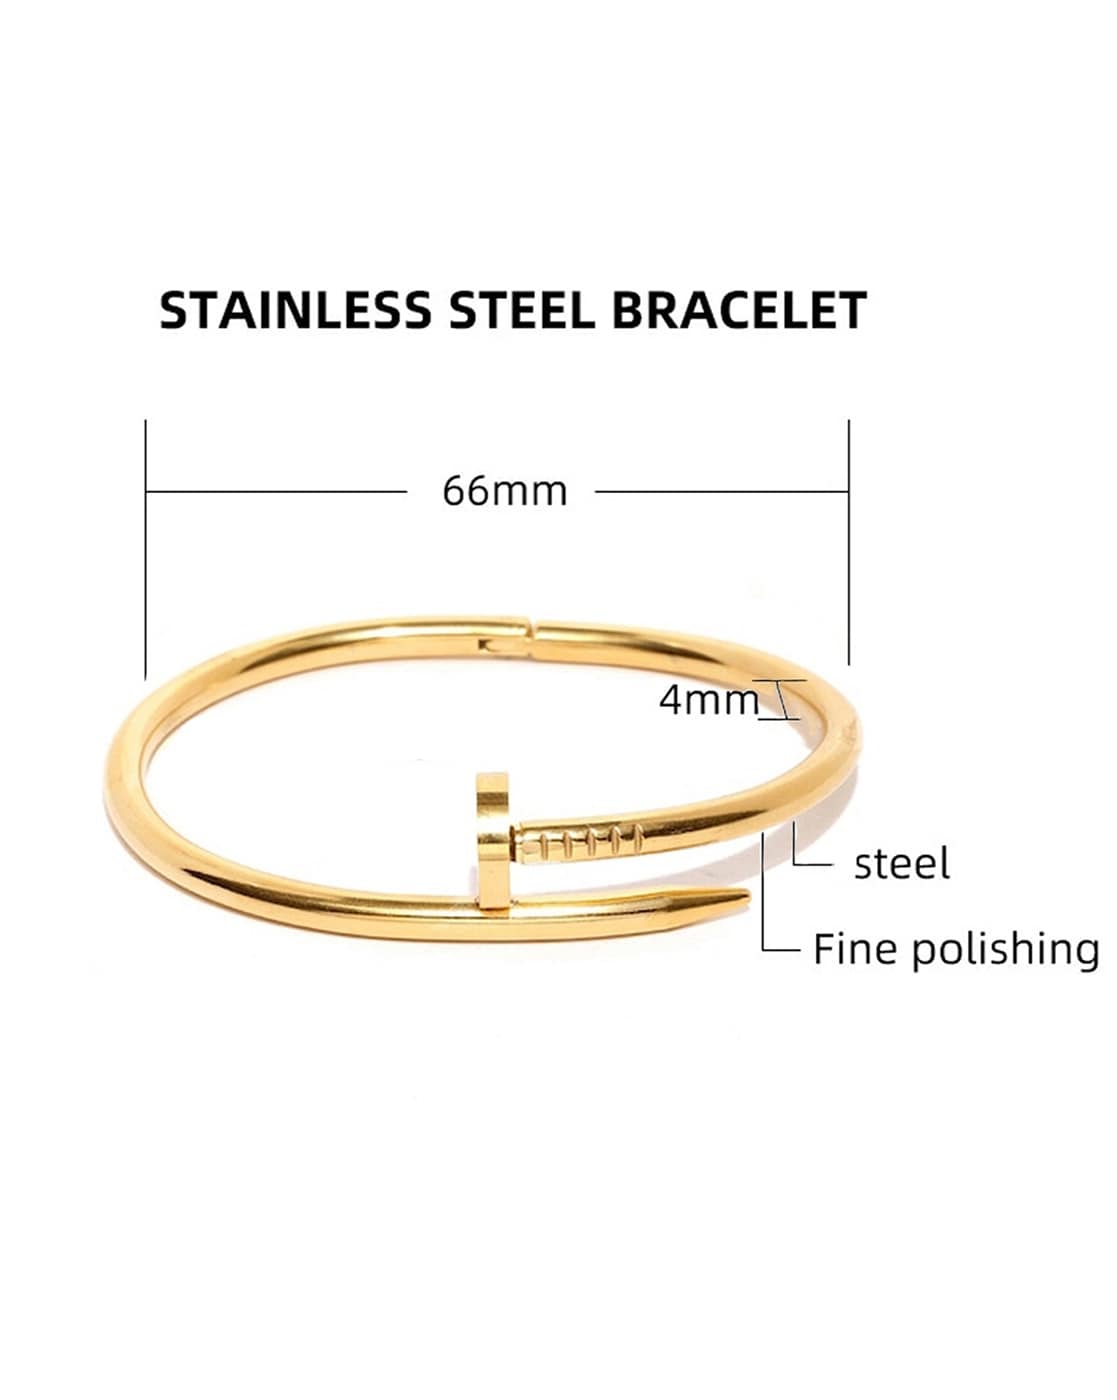 Designer Love Gold Nail Bracelet For Women And Men Stainless Steel Alloy  Armband With Diamond Bangle Bracelet Accents In Gold, Silver, And Rose From  Jewelrydesigners, $4.63 | DHgate.Com